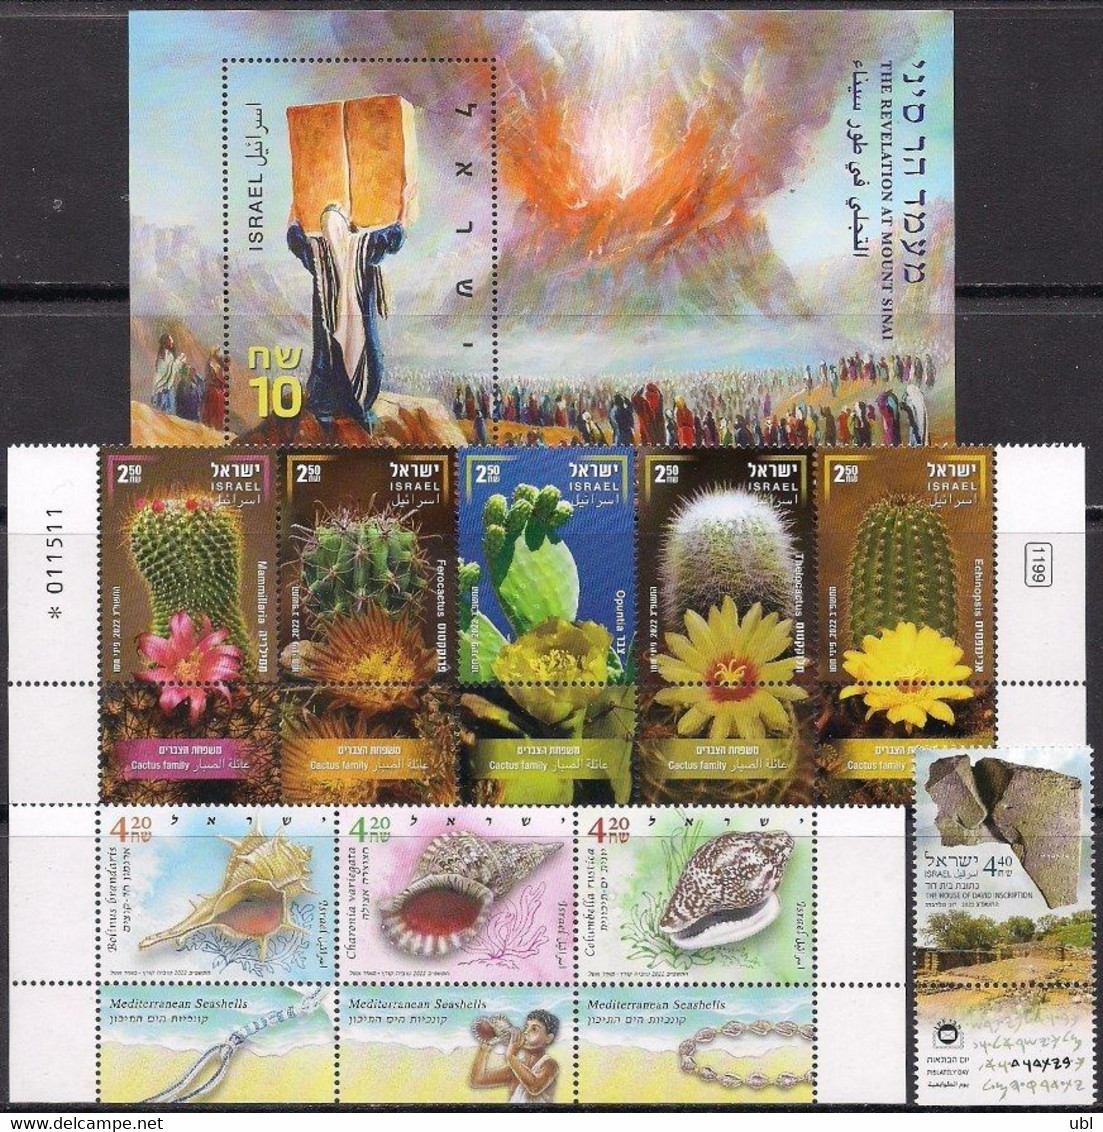 ISRAEL 2022 YEARBOOK - THE COMPLETE ANNUAL STAMPS & SOUVENIR SHEET ISSUE IN A DECORATIVE ALBUM - Collezioni & Lotti